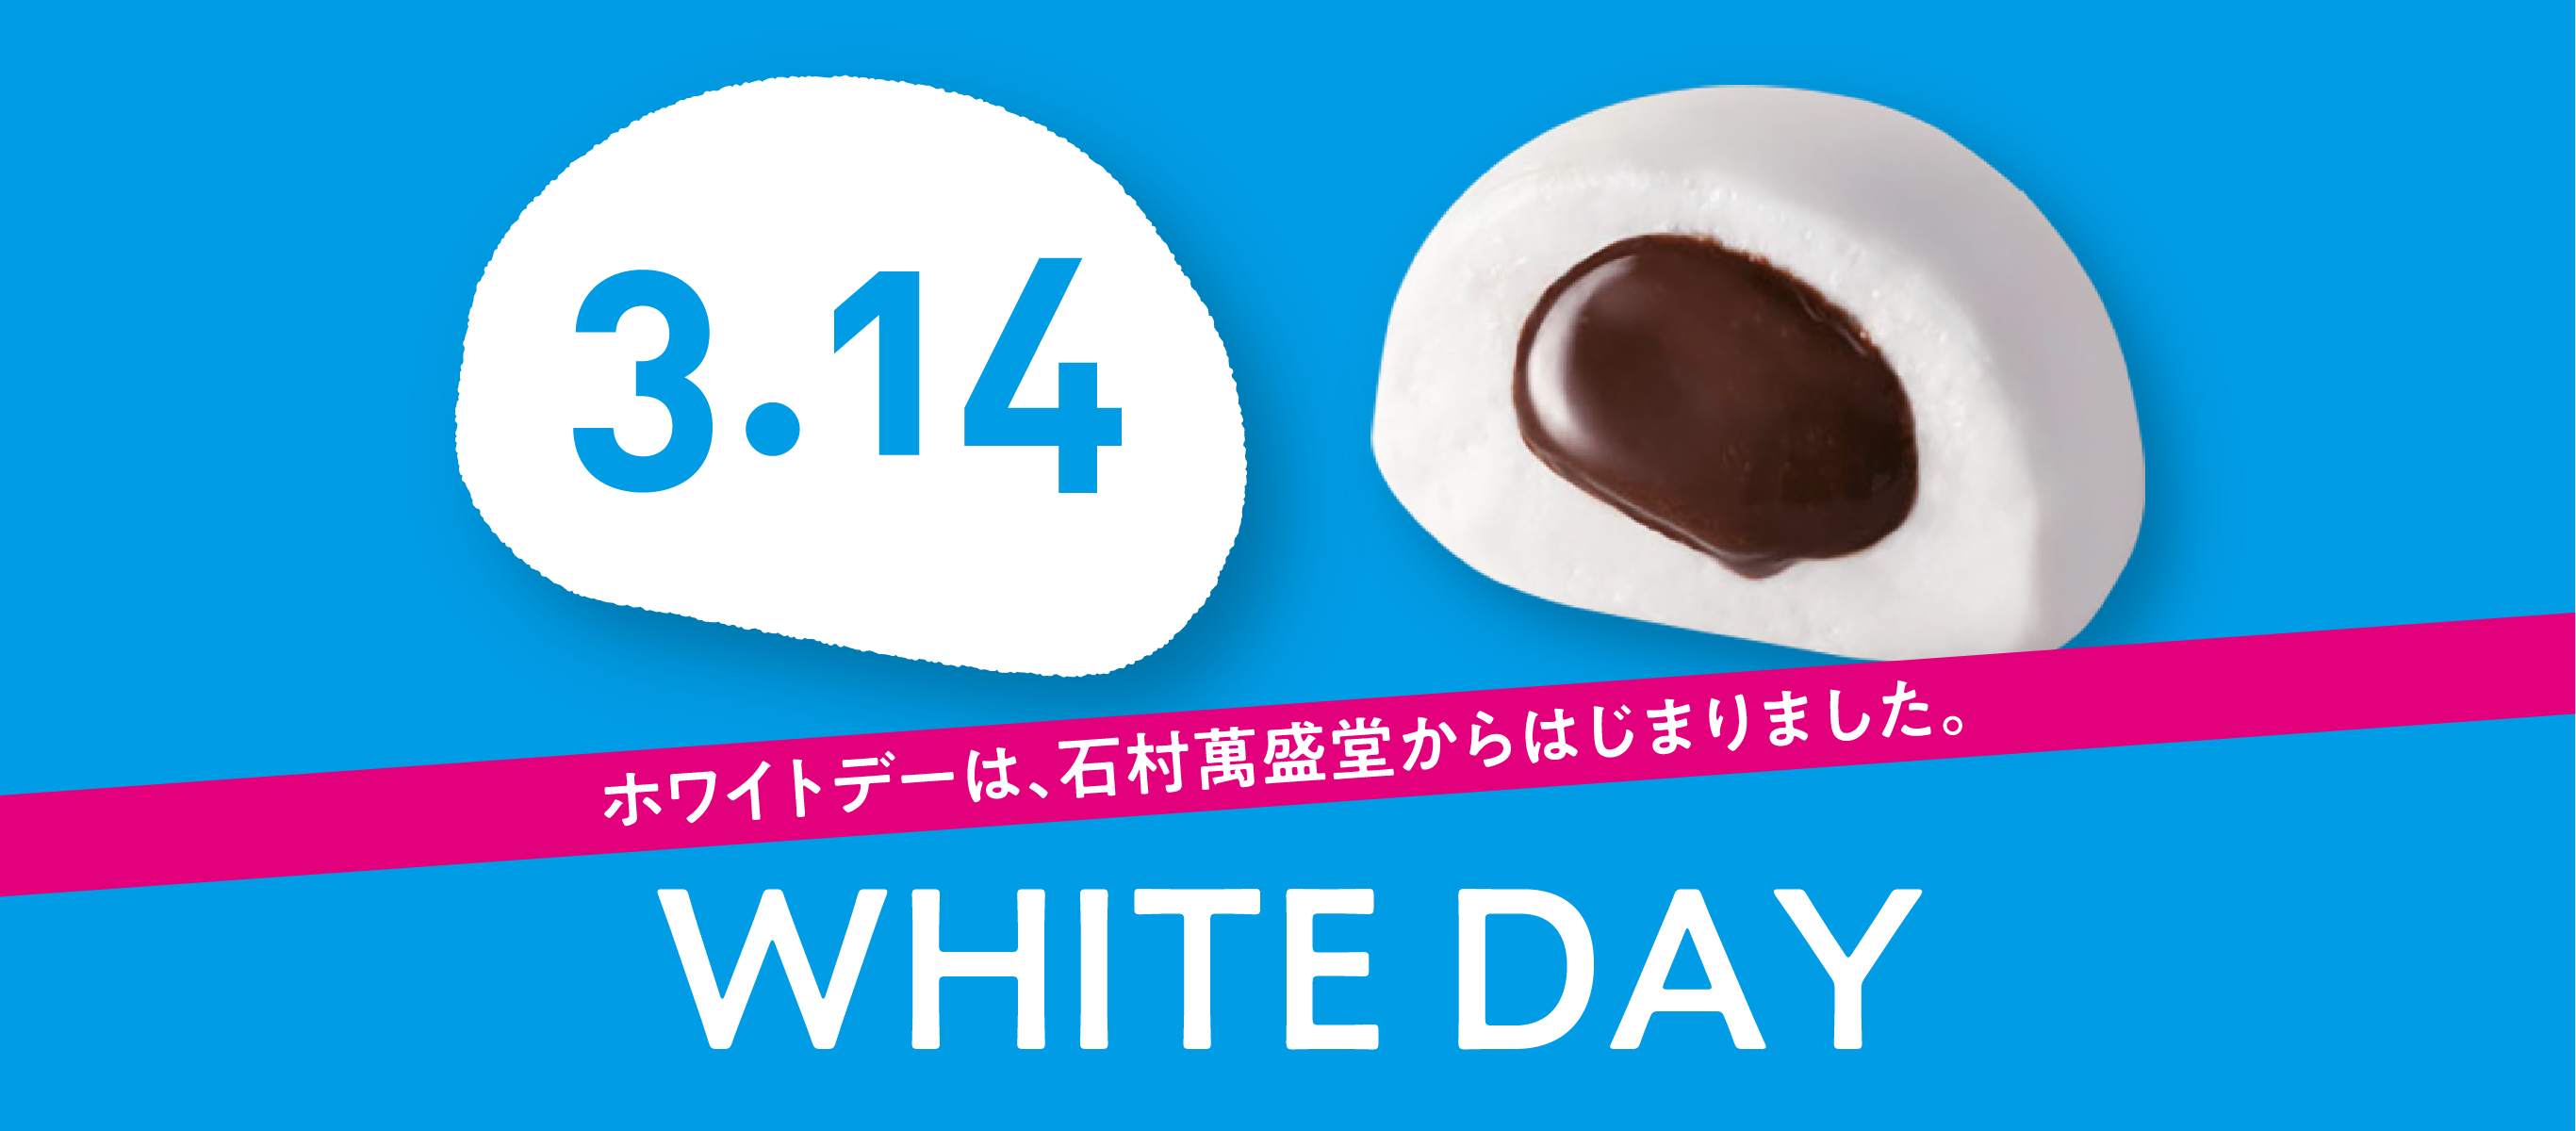 Ishimura Manseidou White Day promotion, featuring a white marshmallow with a chocolate center.